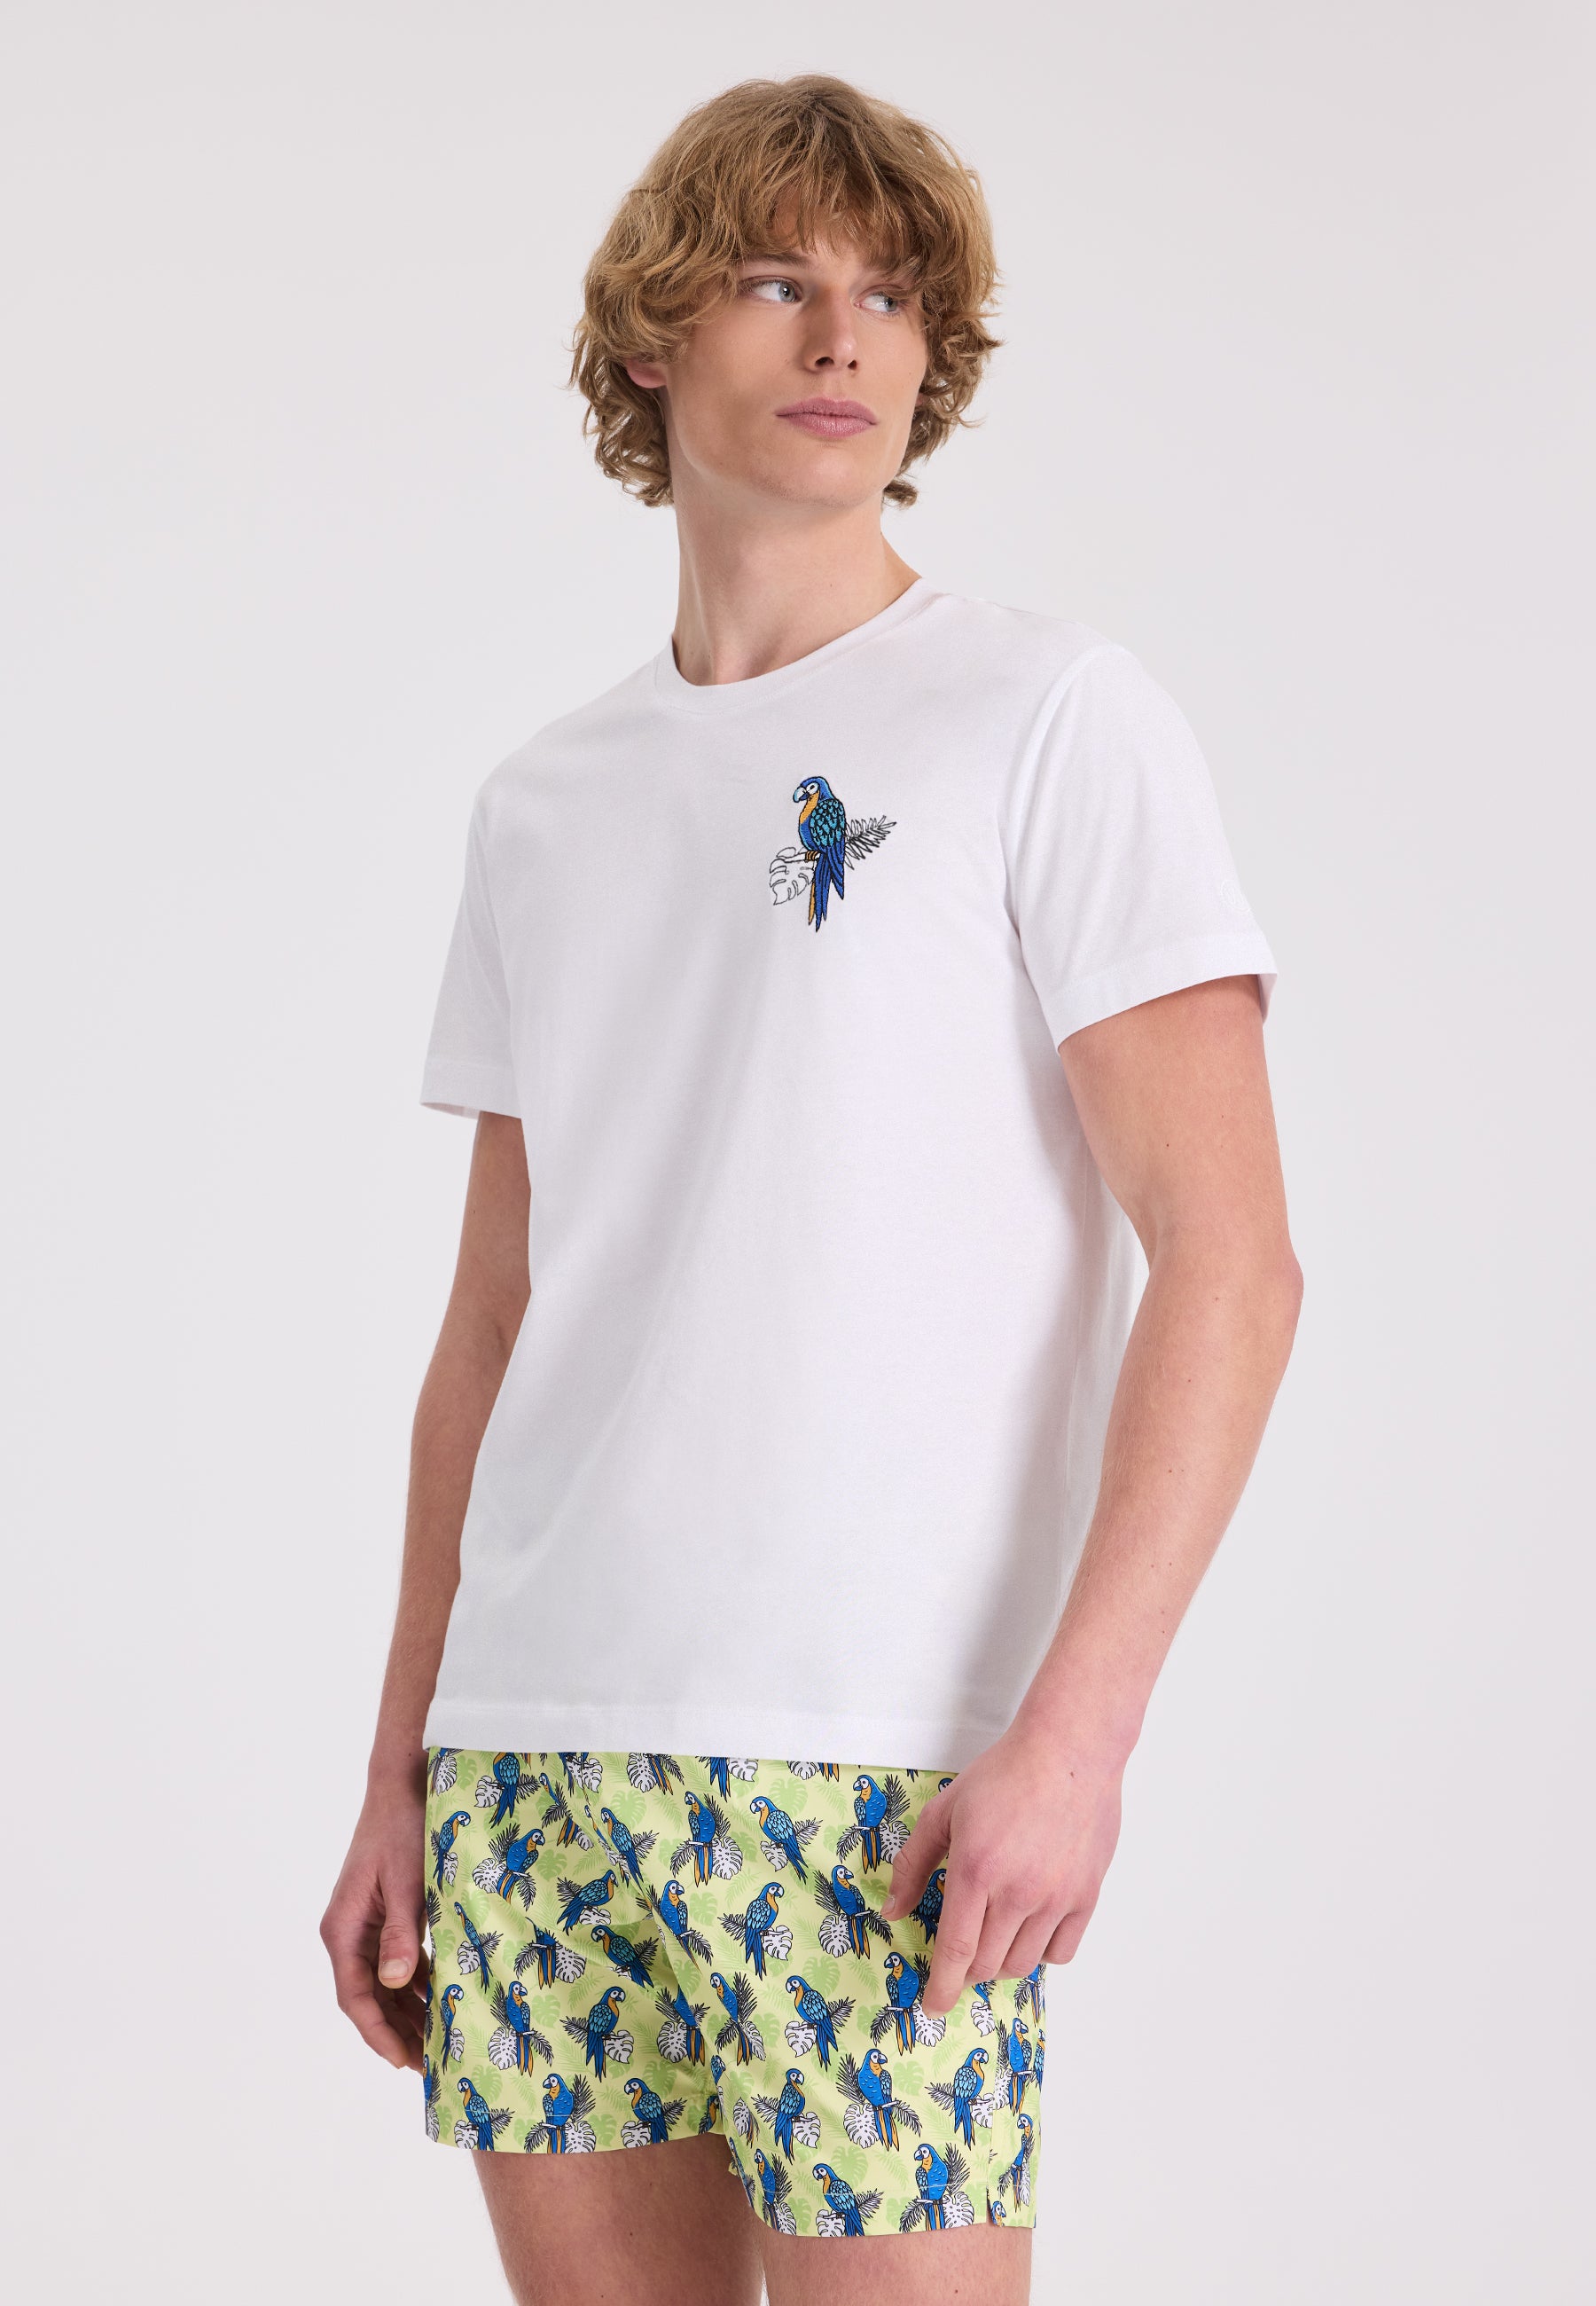 WMEMBROIDERY PARROT TEE in White